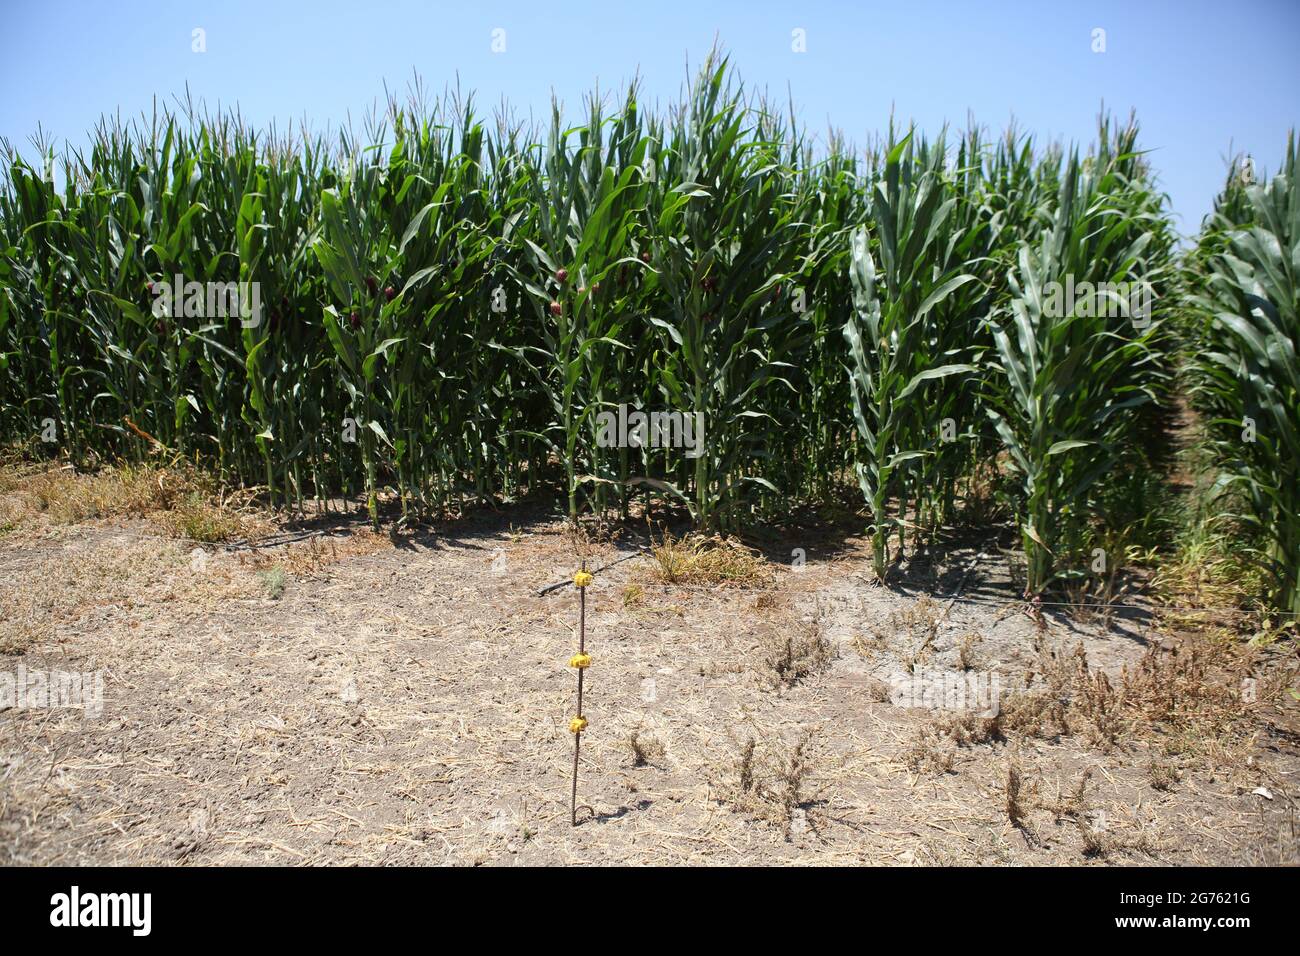 Corn field, Zea Mays, Indian Corn or Maize, edible grain plant of the Grass family or Poaceae, Drip Irrigation & anti tresspassing electric lines used Stock Photo